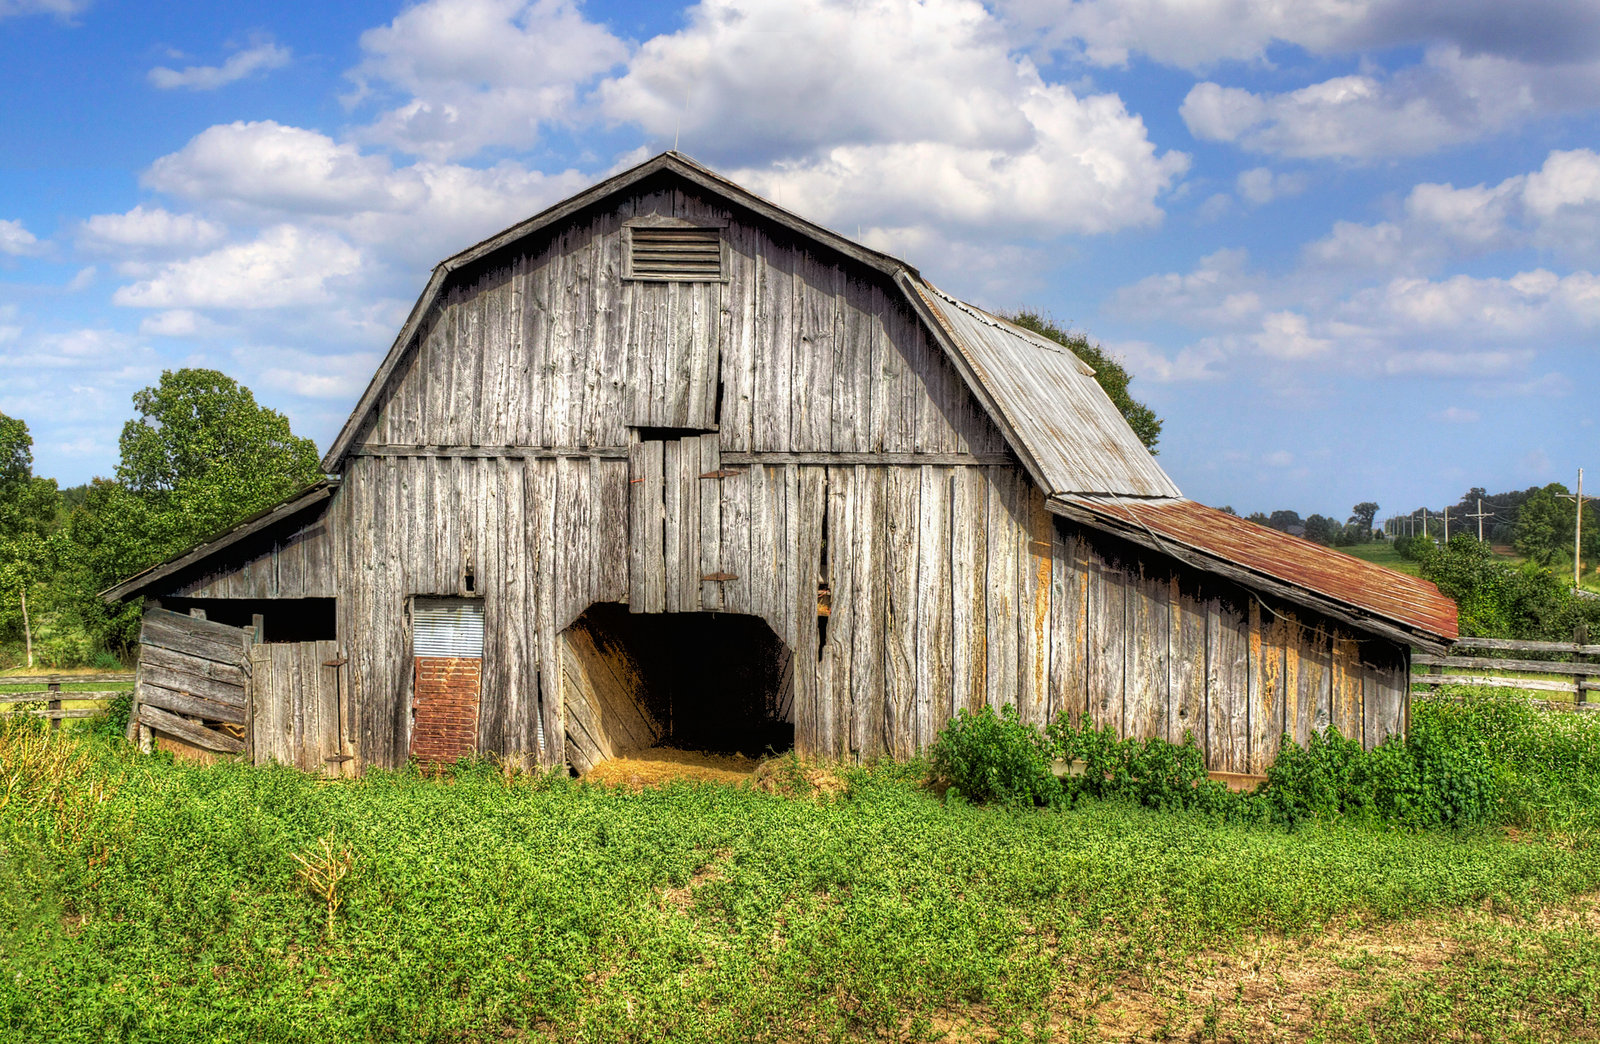 Old Barn Ii HDr By Joelht74